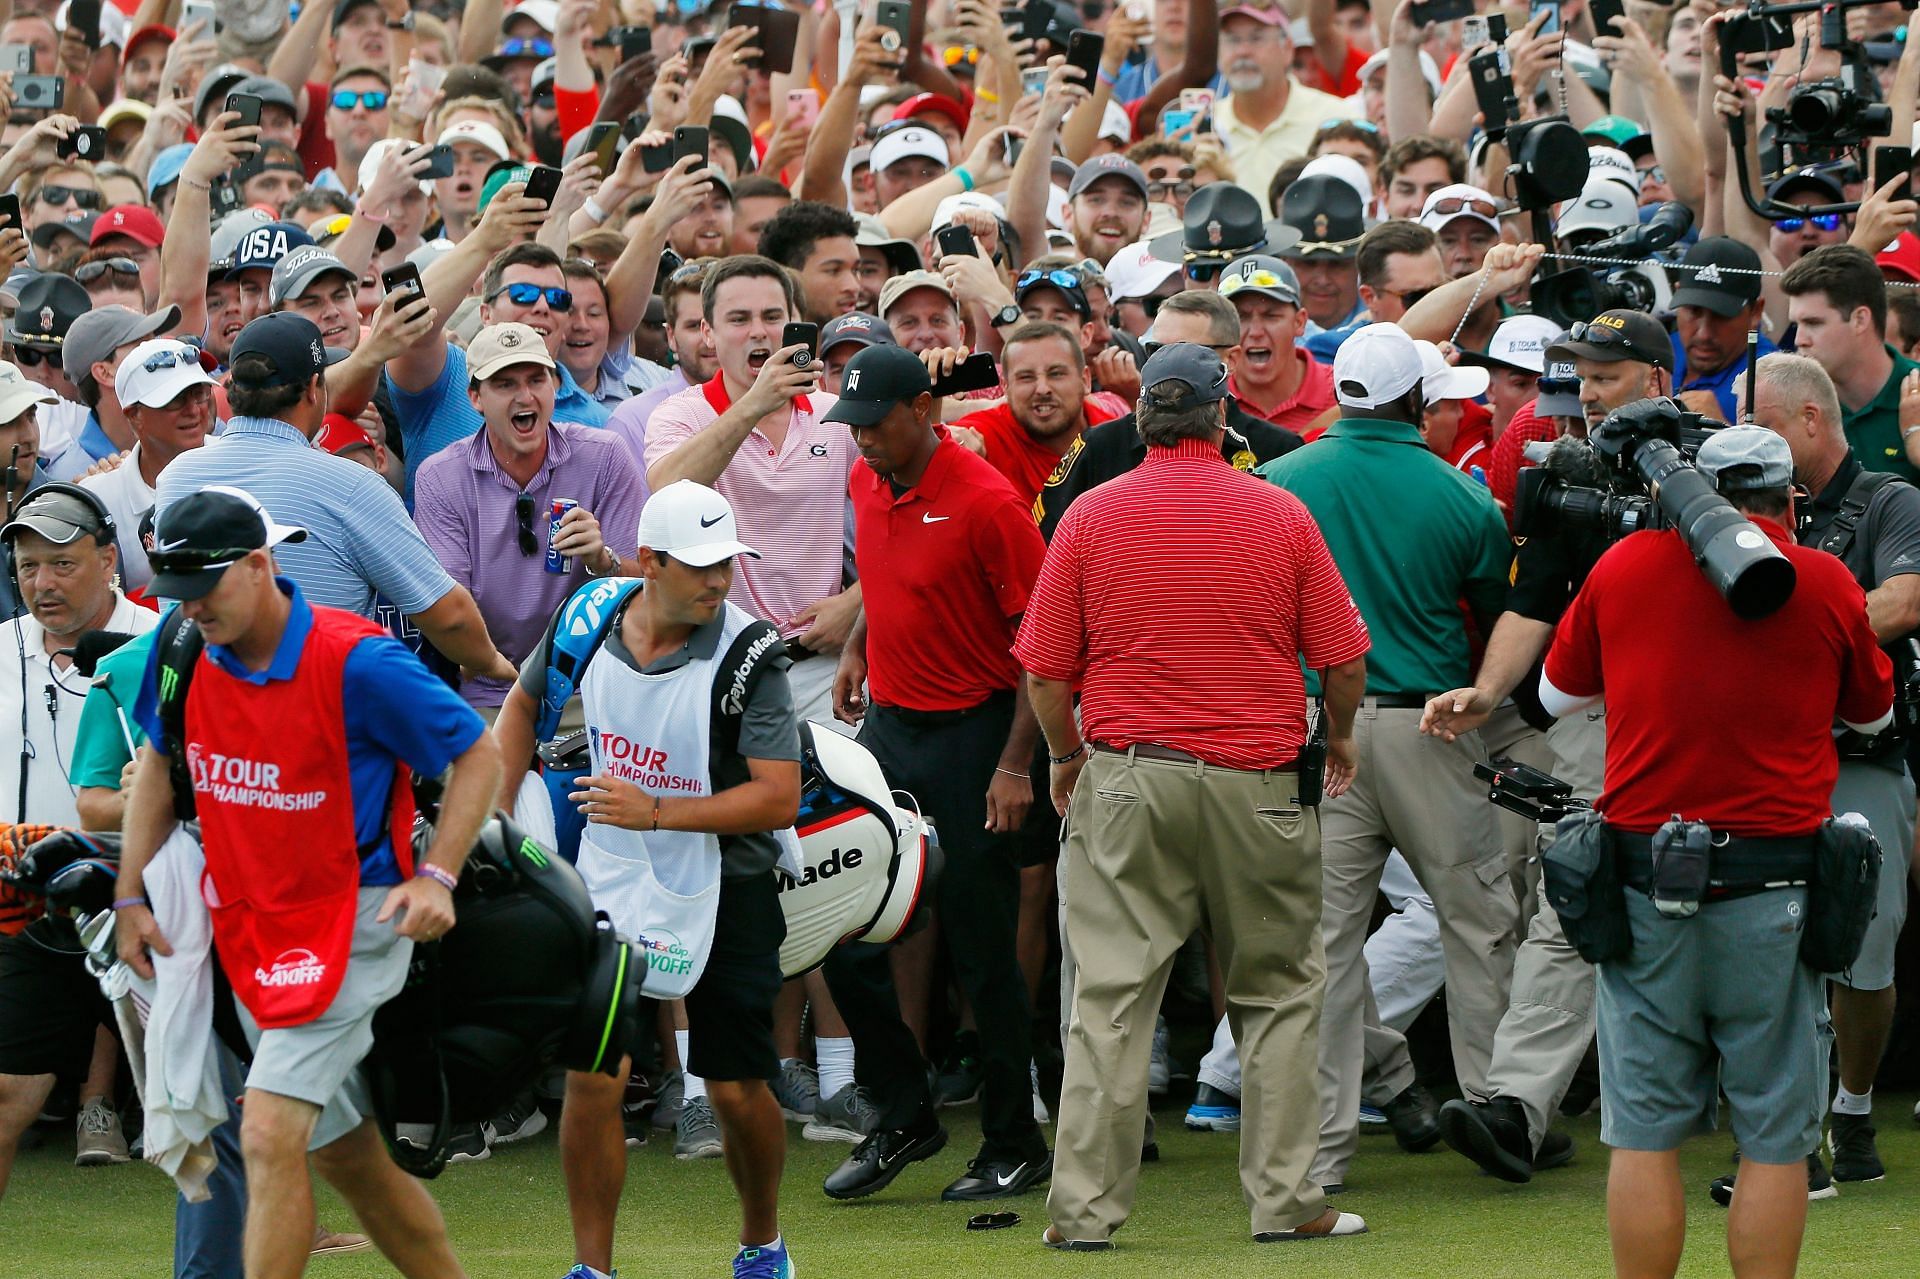 Watch When A Massive Crowd Flooded The Greens At East Lake Golf Club